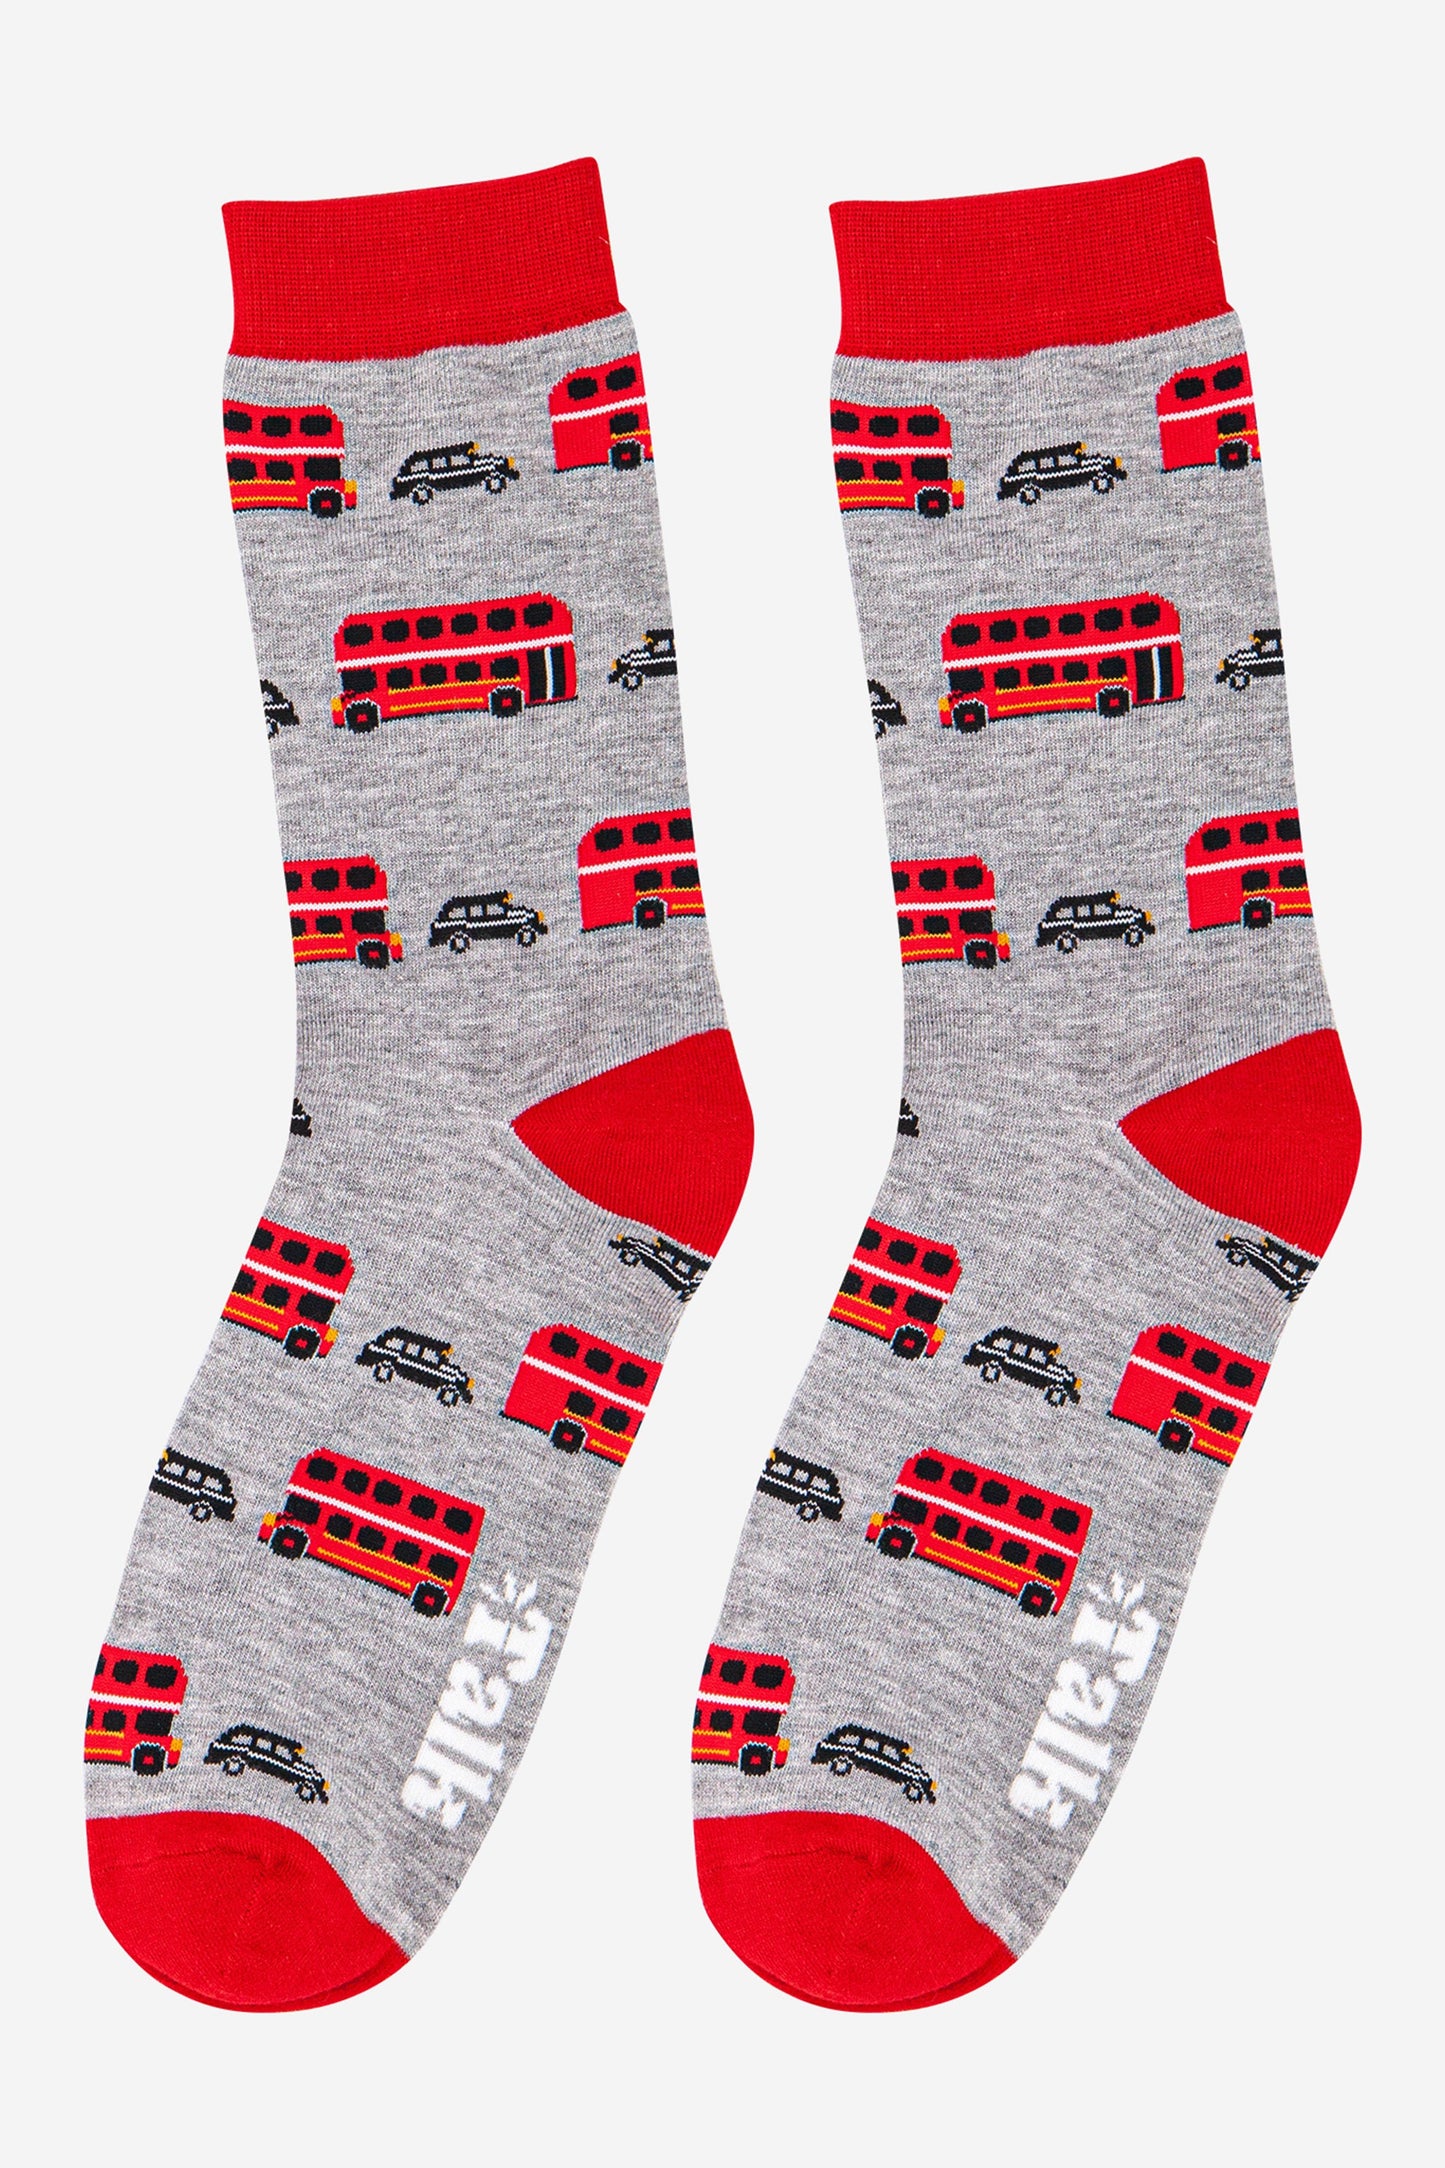 grey and red socks with a pattern featuring black London taxis and red double decker buses